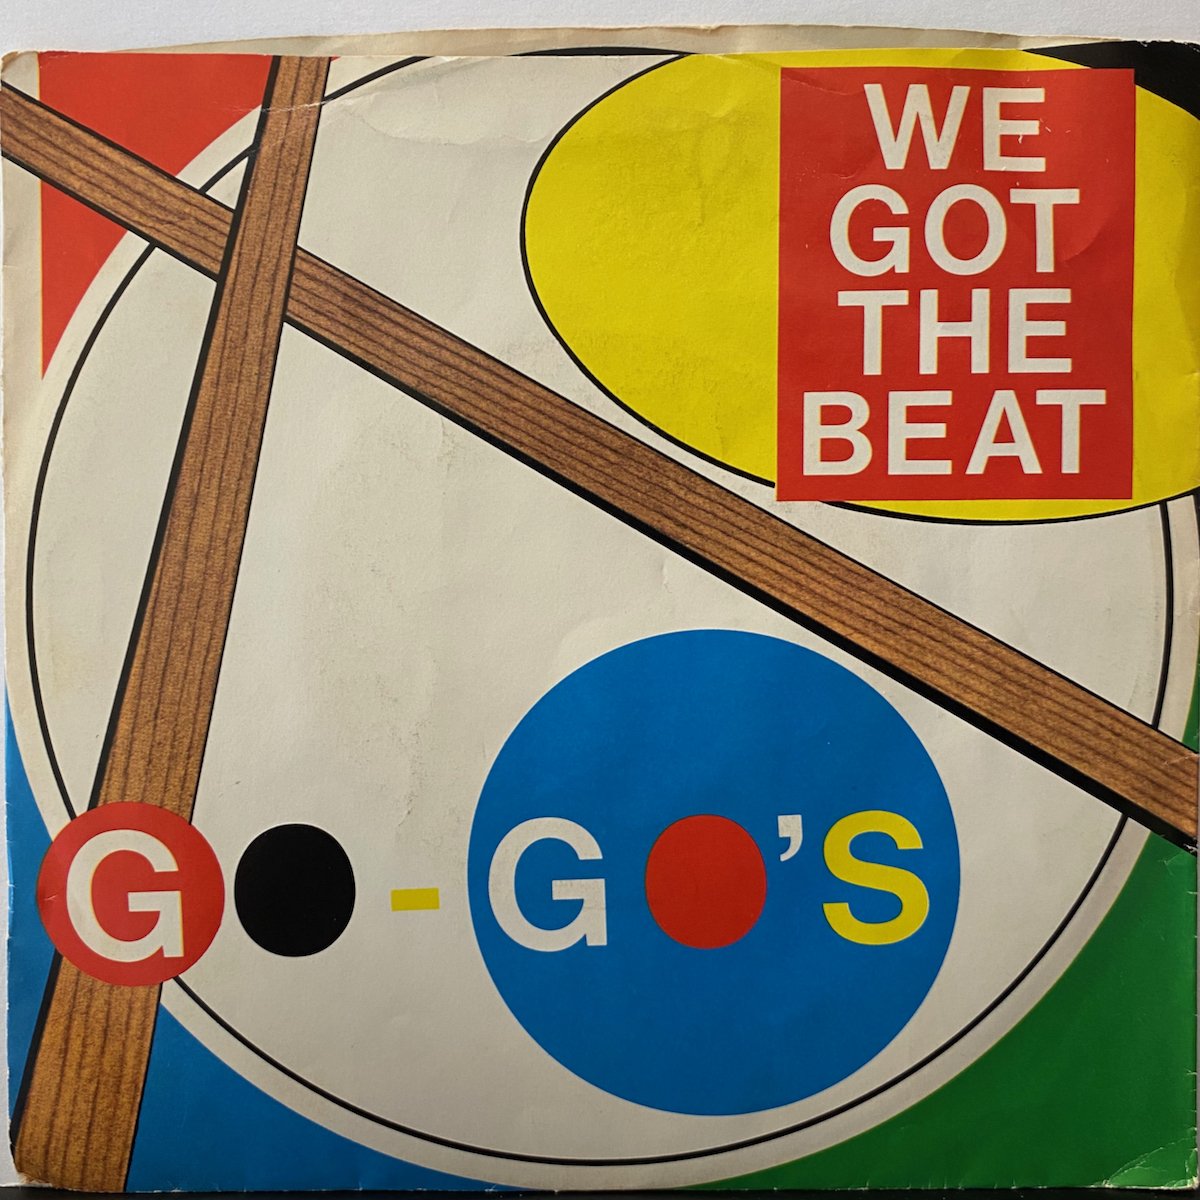 The Go-Go’s - We Got The Beat mp3 download